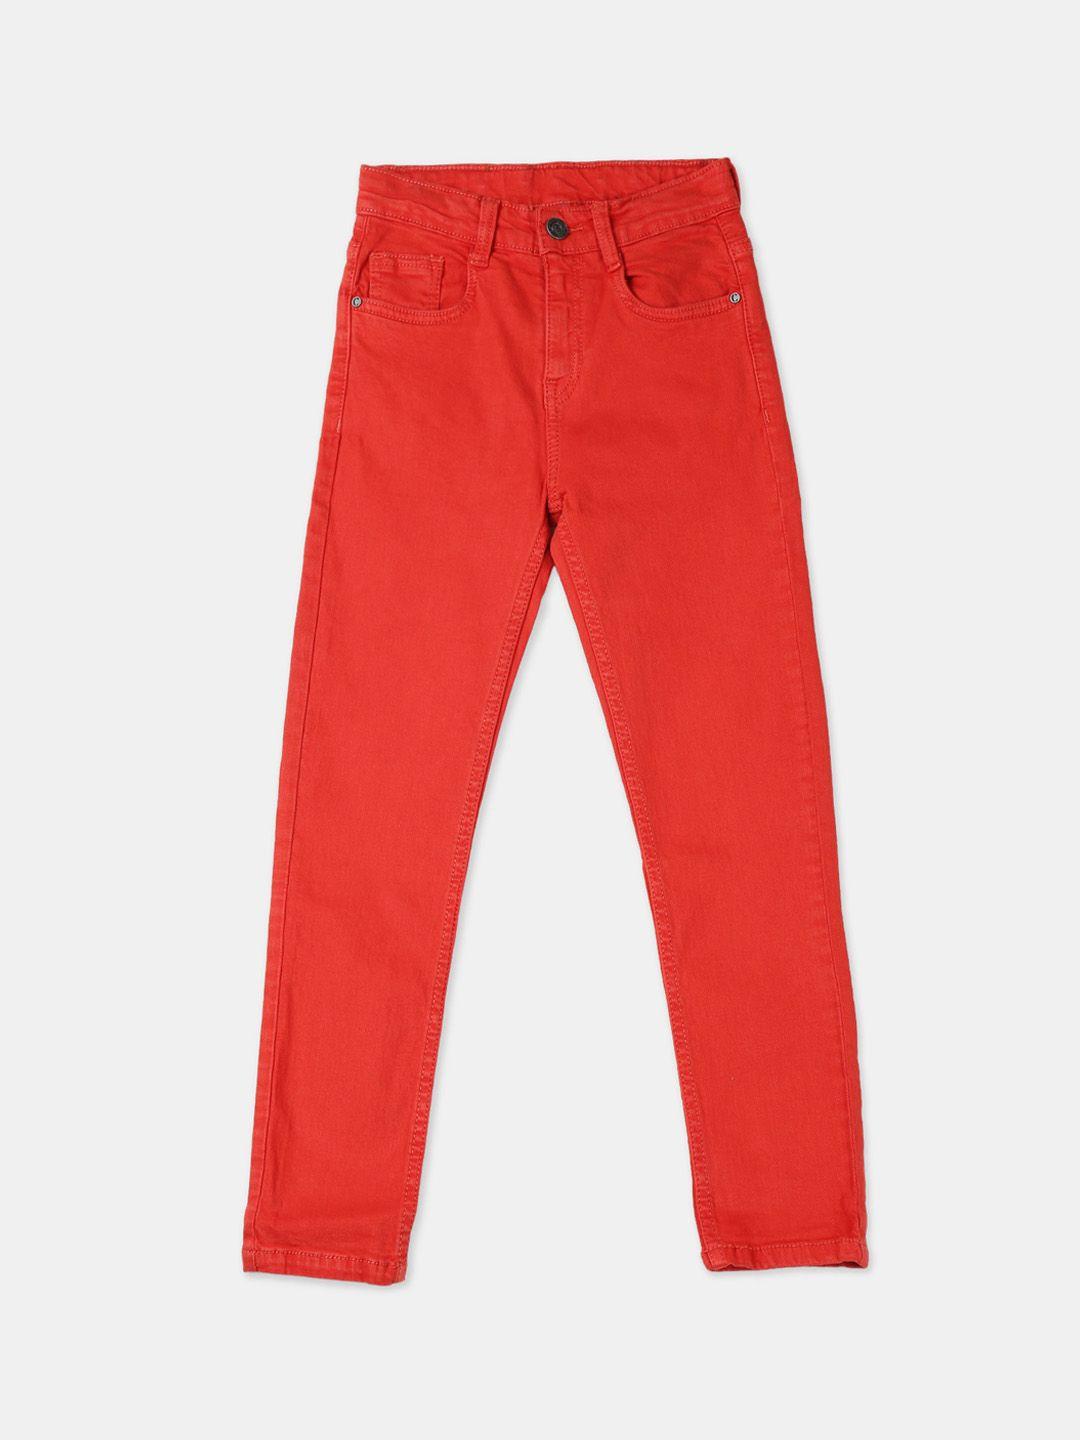 Cherokee Boys Red Regular Fit Solid Colored Jeans